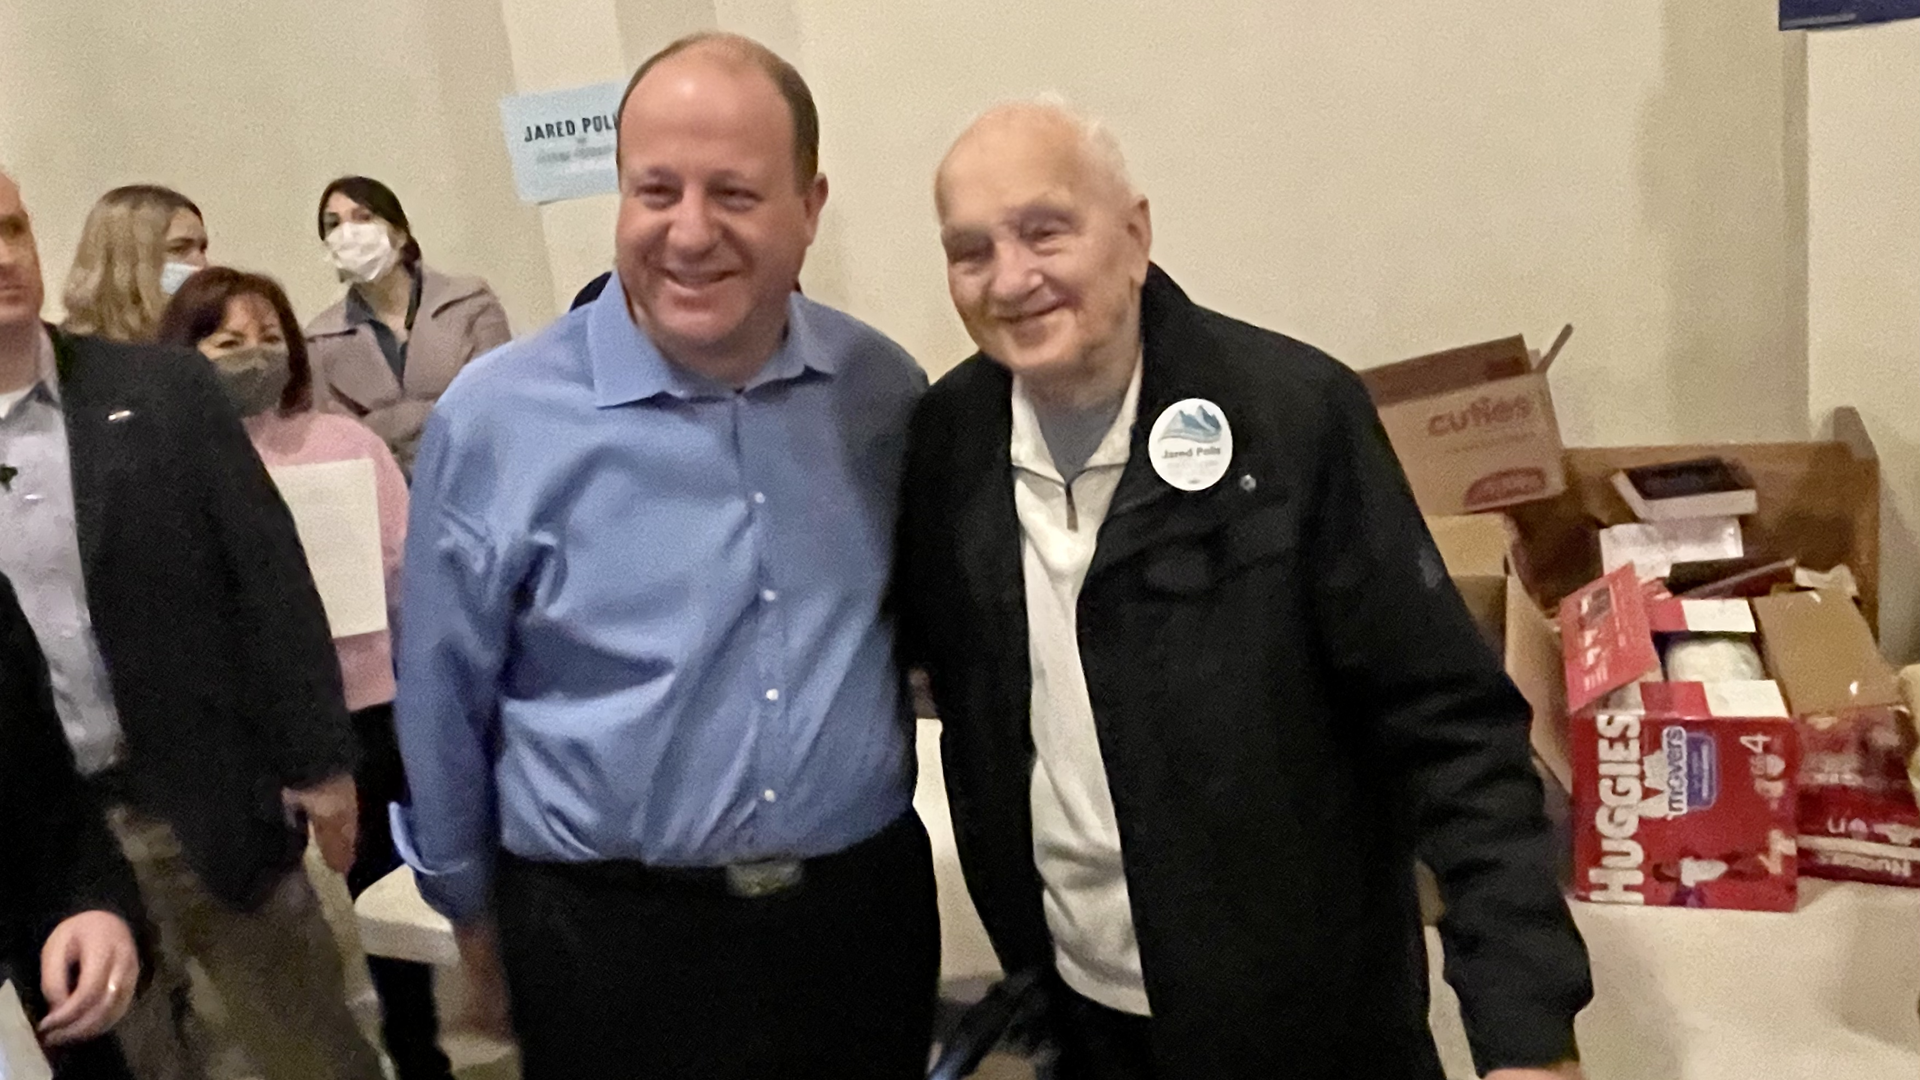 Gov. Jared Polis poses for a photo at a campaign event in Aurora. Photo: John Frank/Axios